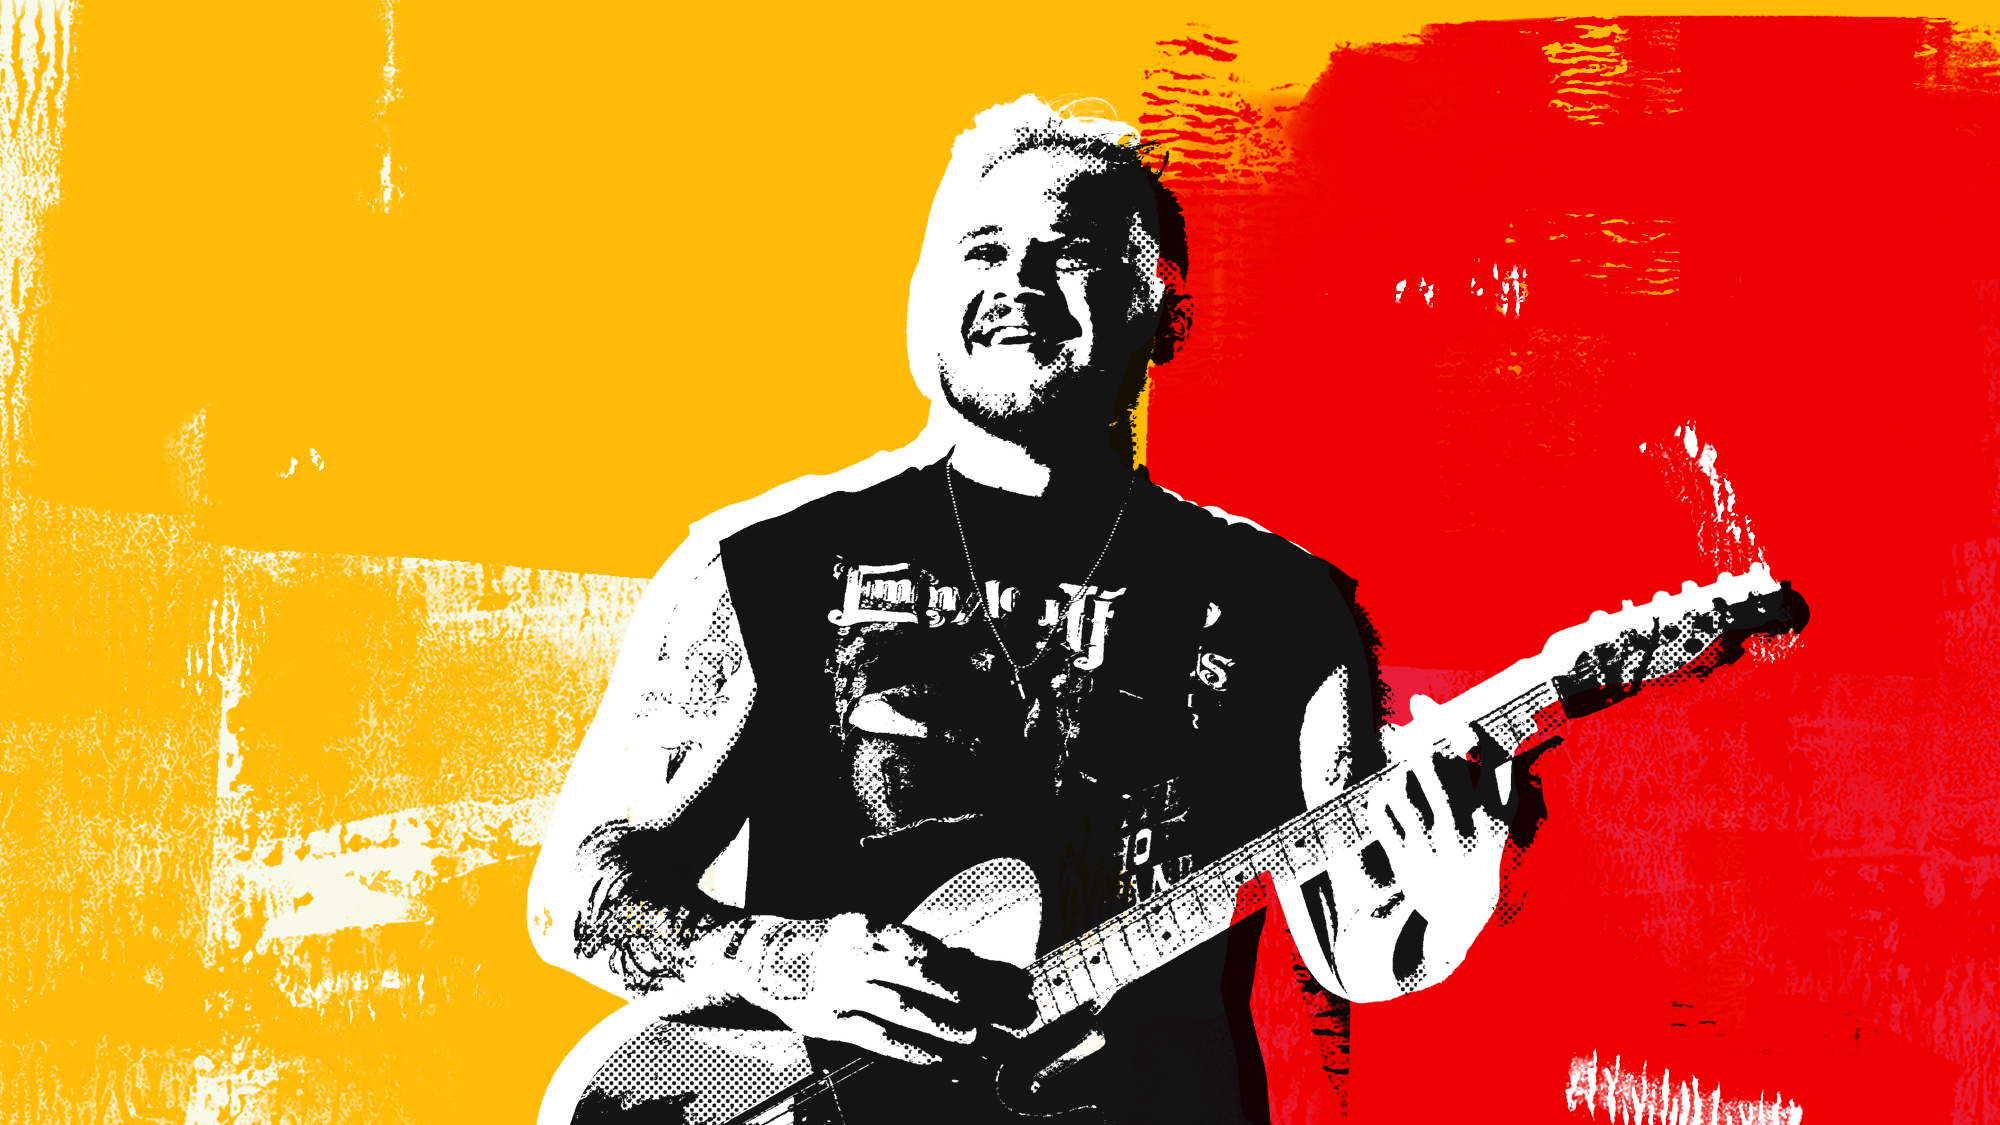 A photo illustration of Zach Bryan smiling while playing guitar